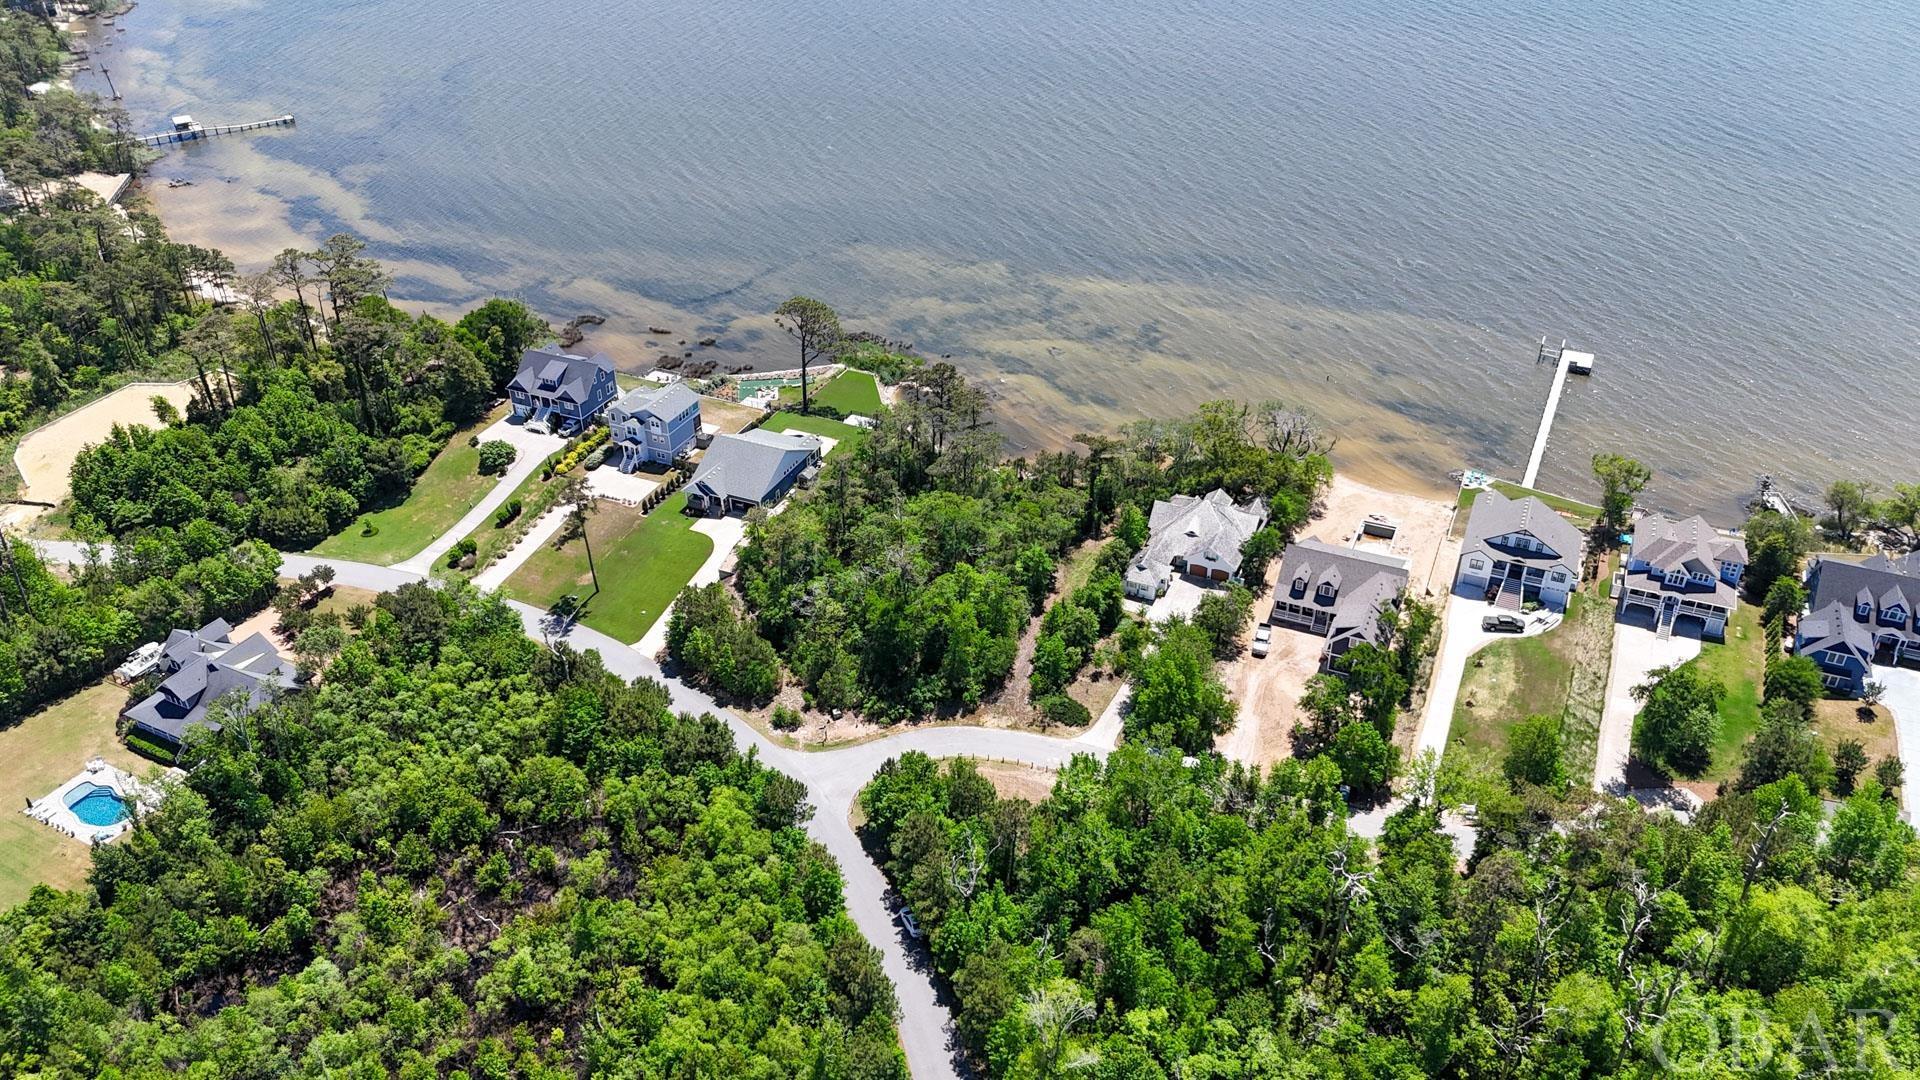 Amazing sound front lot in the Carlyle Community! This large 18,000-square-foot lot would make the perfect location for your dream home. This is located one lot down from the community sound access with amazing views over the Albemarle Sound. The majority of this lot falls in the X -Flood Zone setting you free from the need for flood insurance. Carlyle on the Sound emphasizes the need to preserve the natural foliage of the Outer Banks with 45% of the neighborhood being preserved as open space! Ask your agent about ready-to-build plans for this beautiful lot.